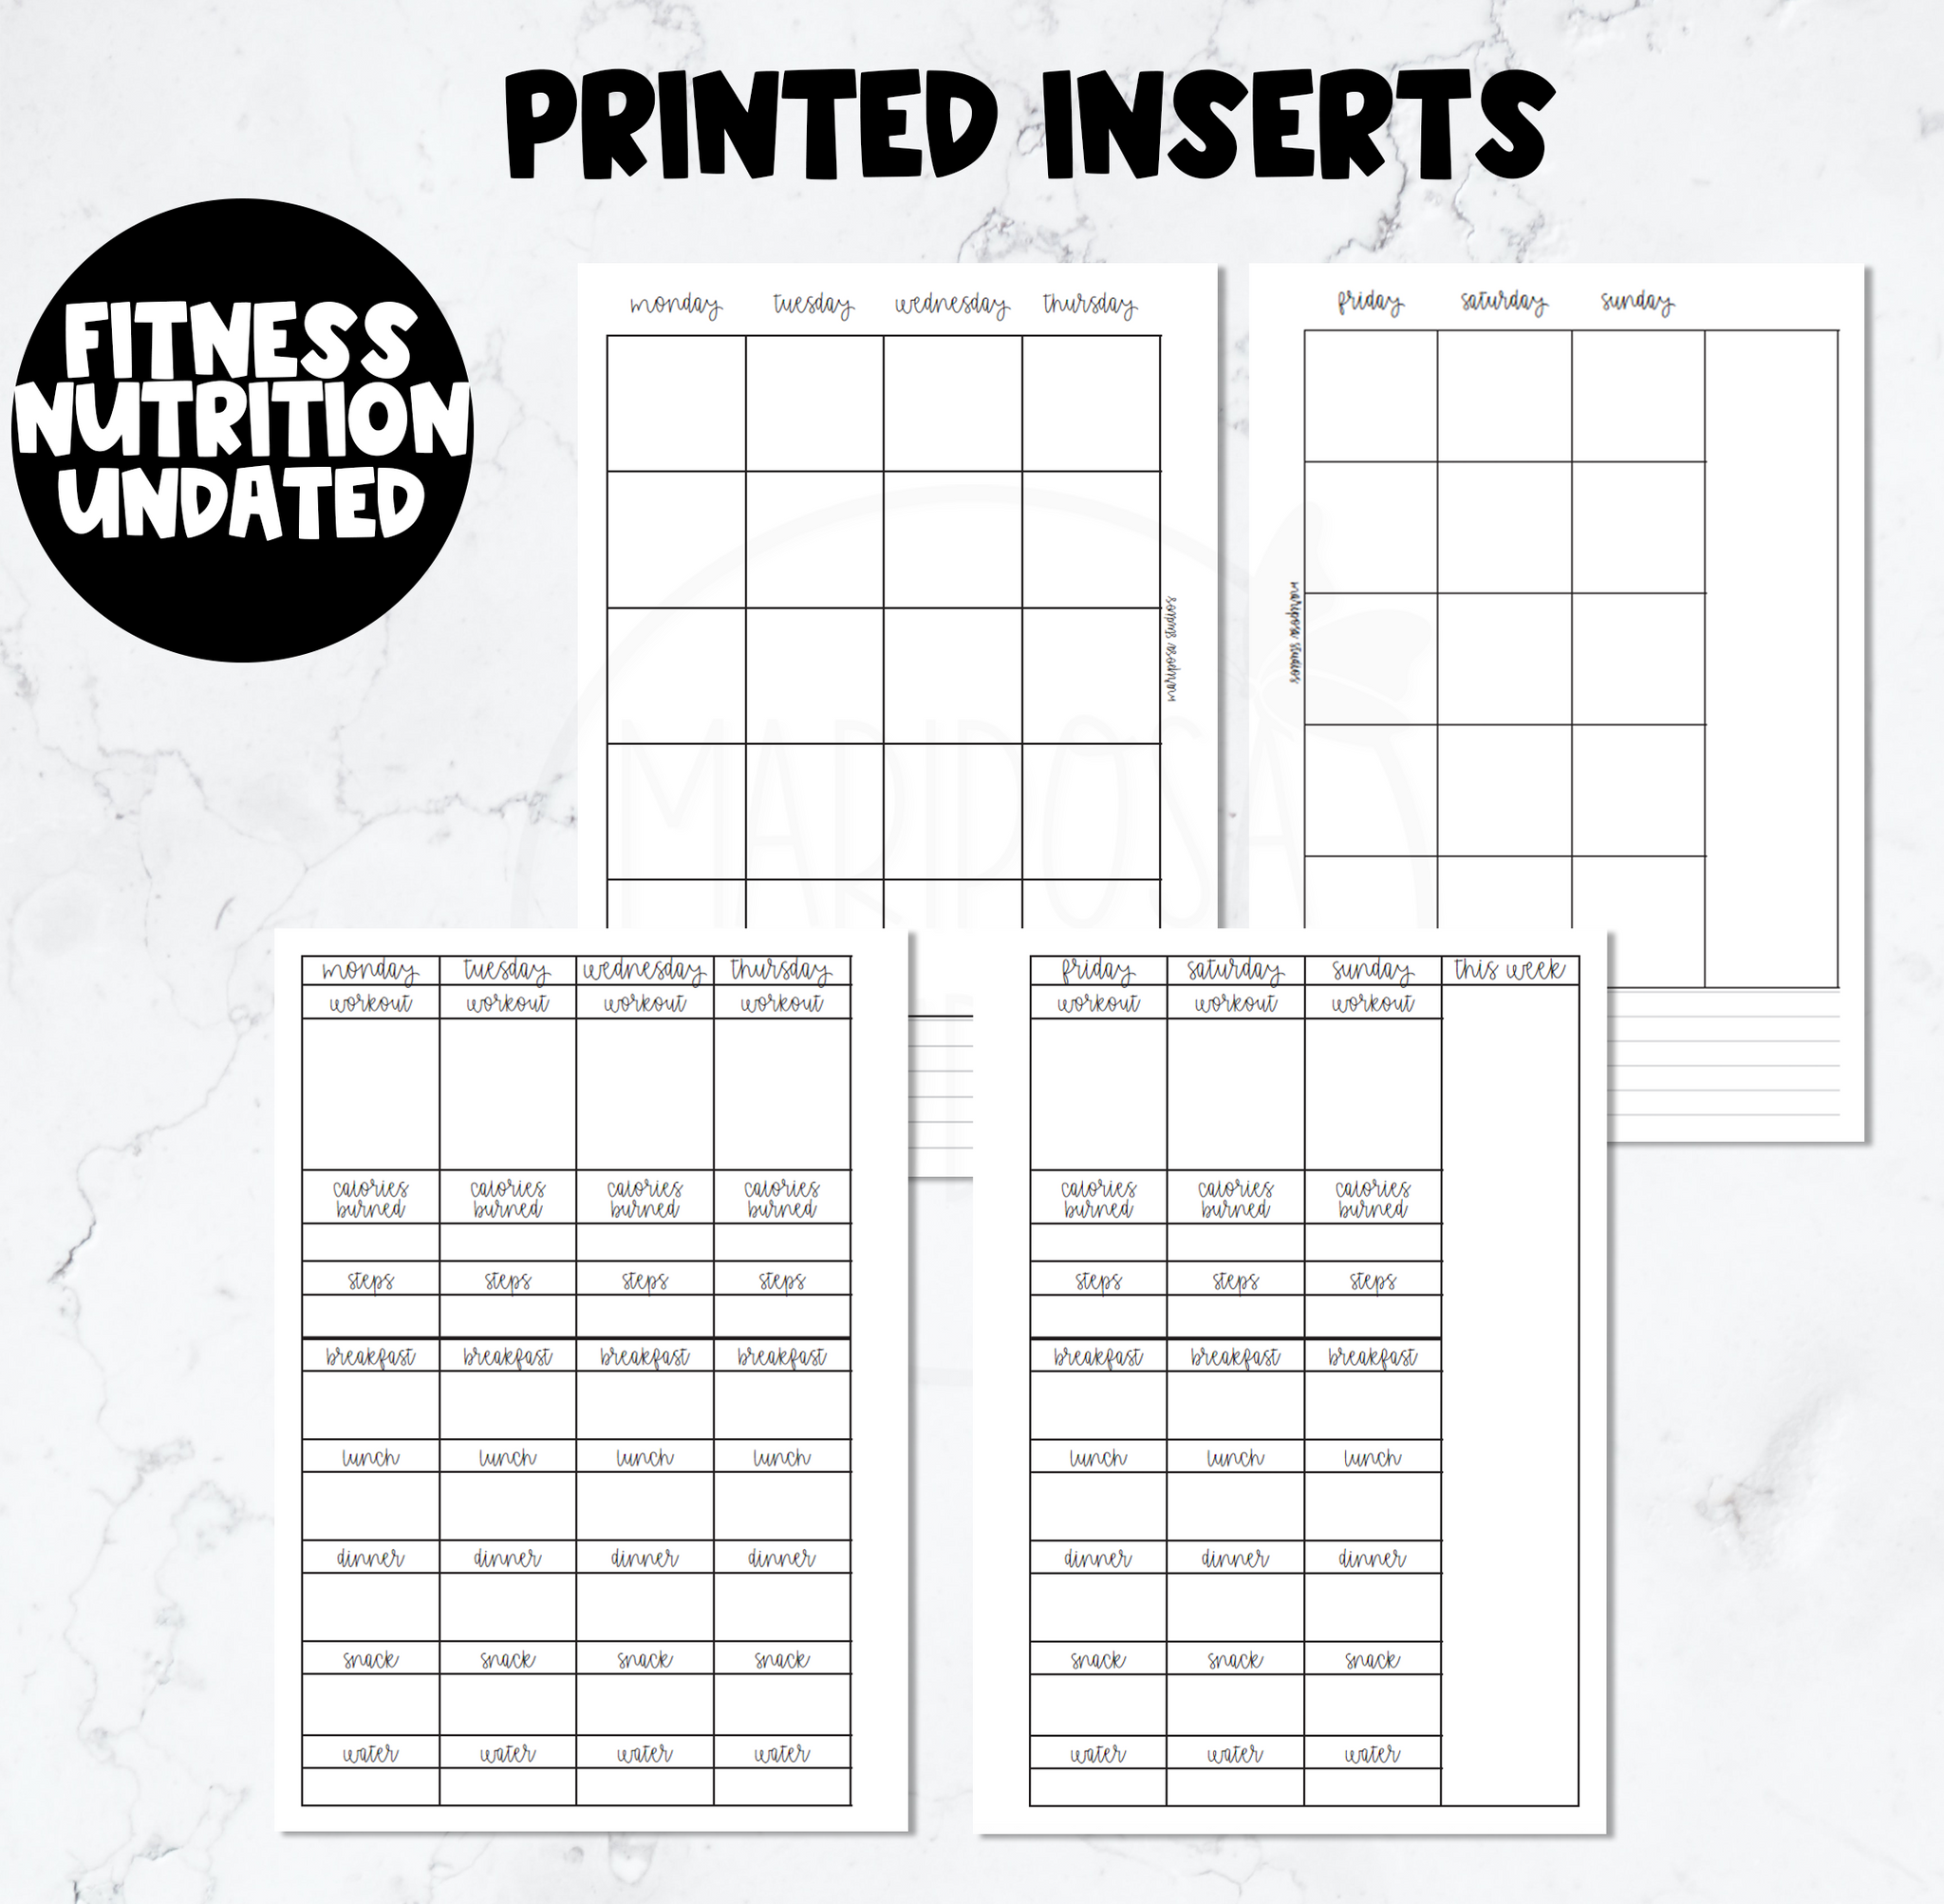 Fitness & Nutrition | PRINTED INSERTS